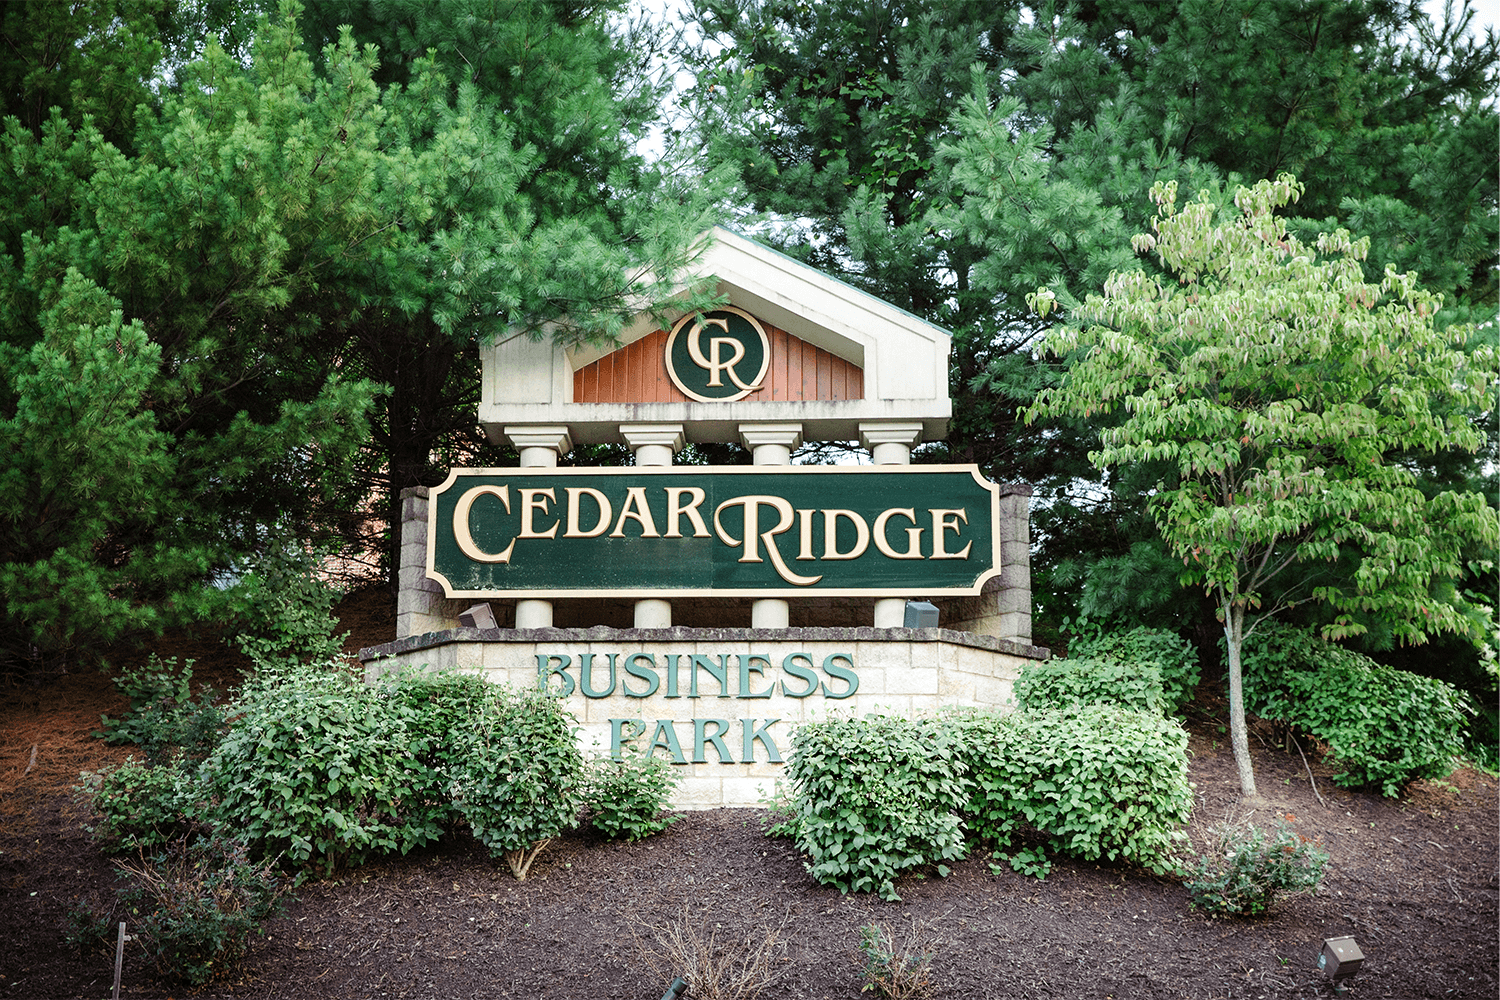 Cedar Ridge Business Park monument sign surrounded by bushes and trees